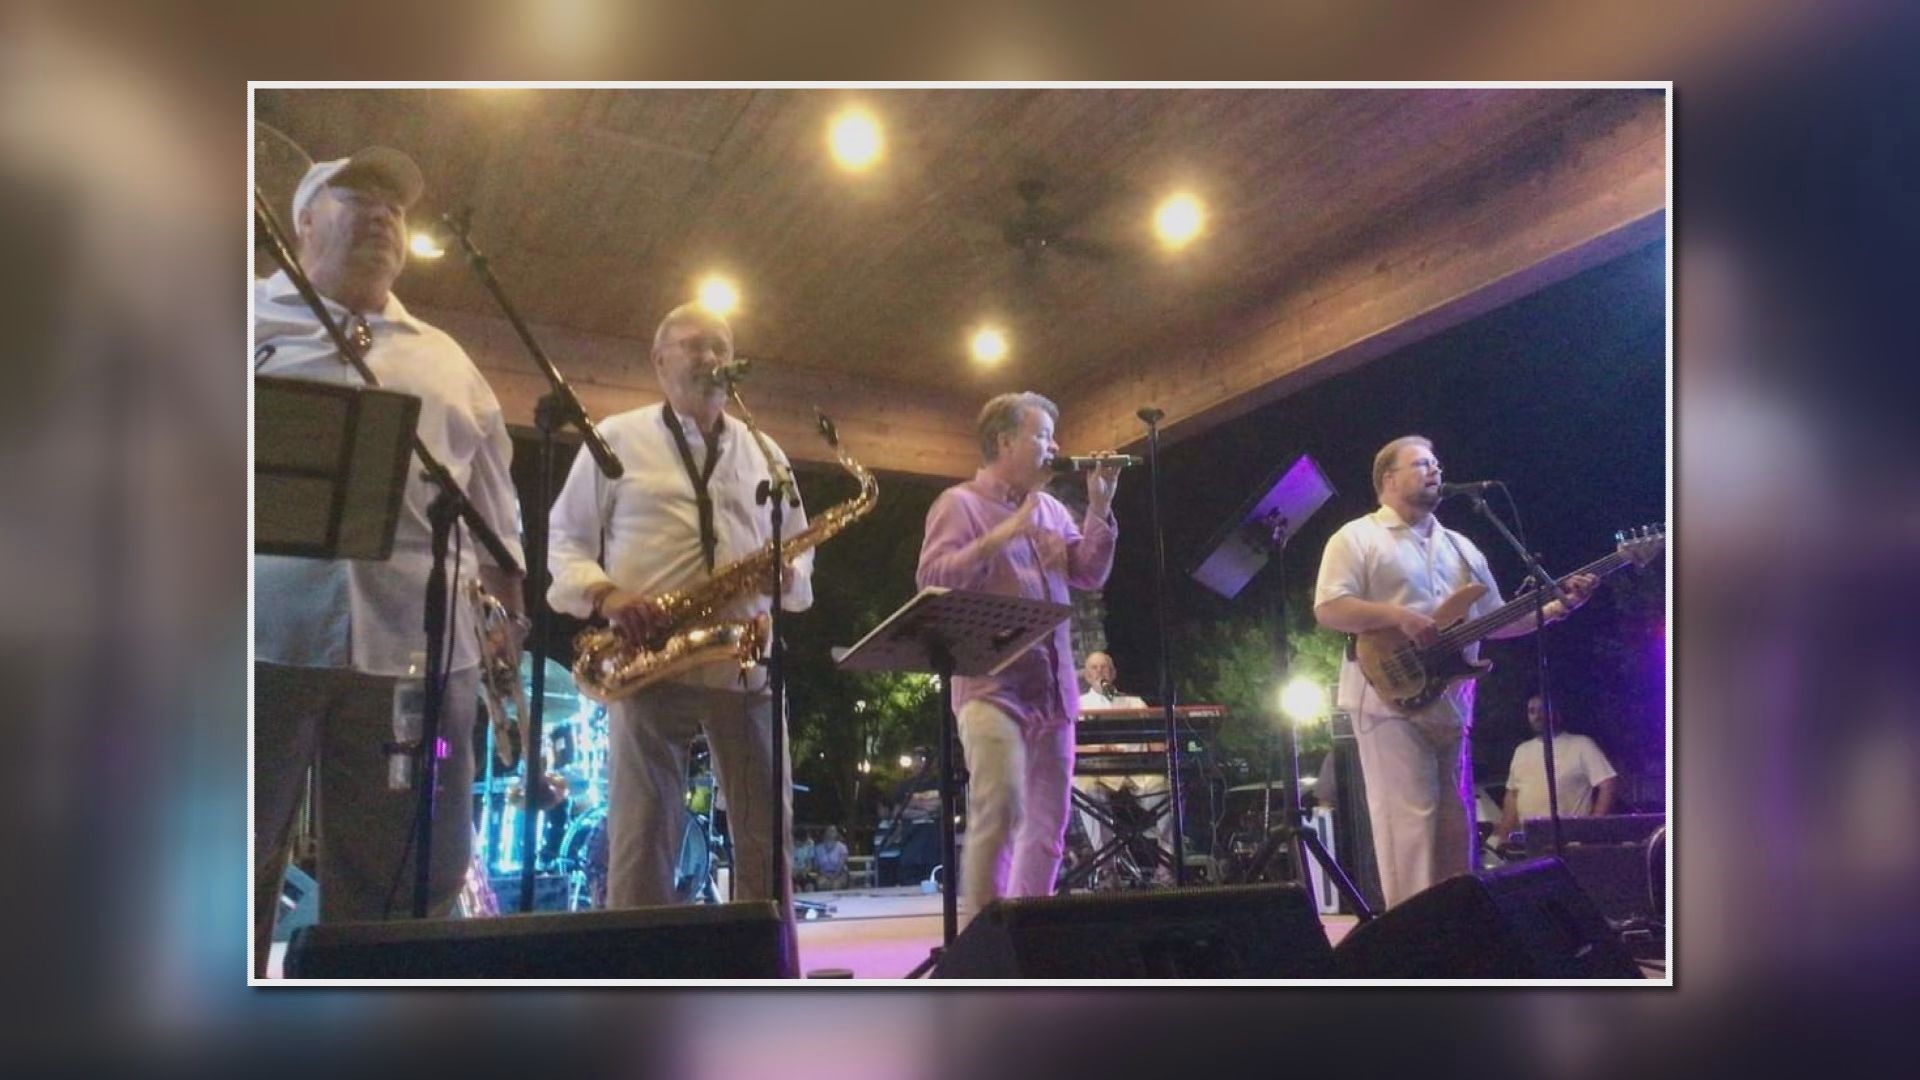 WFMY’s Eric Chilton grew up watching beach bands play. Now his group is getting ready to play at North Myrtle Beach.